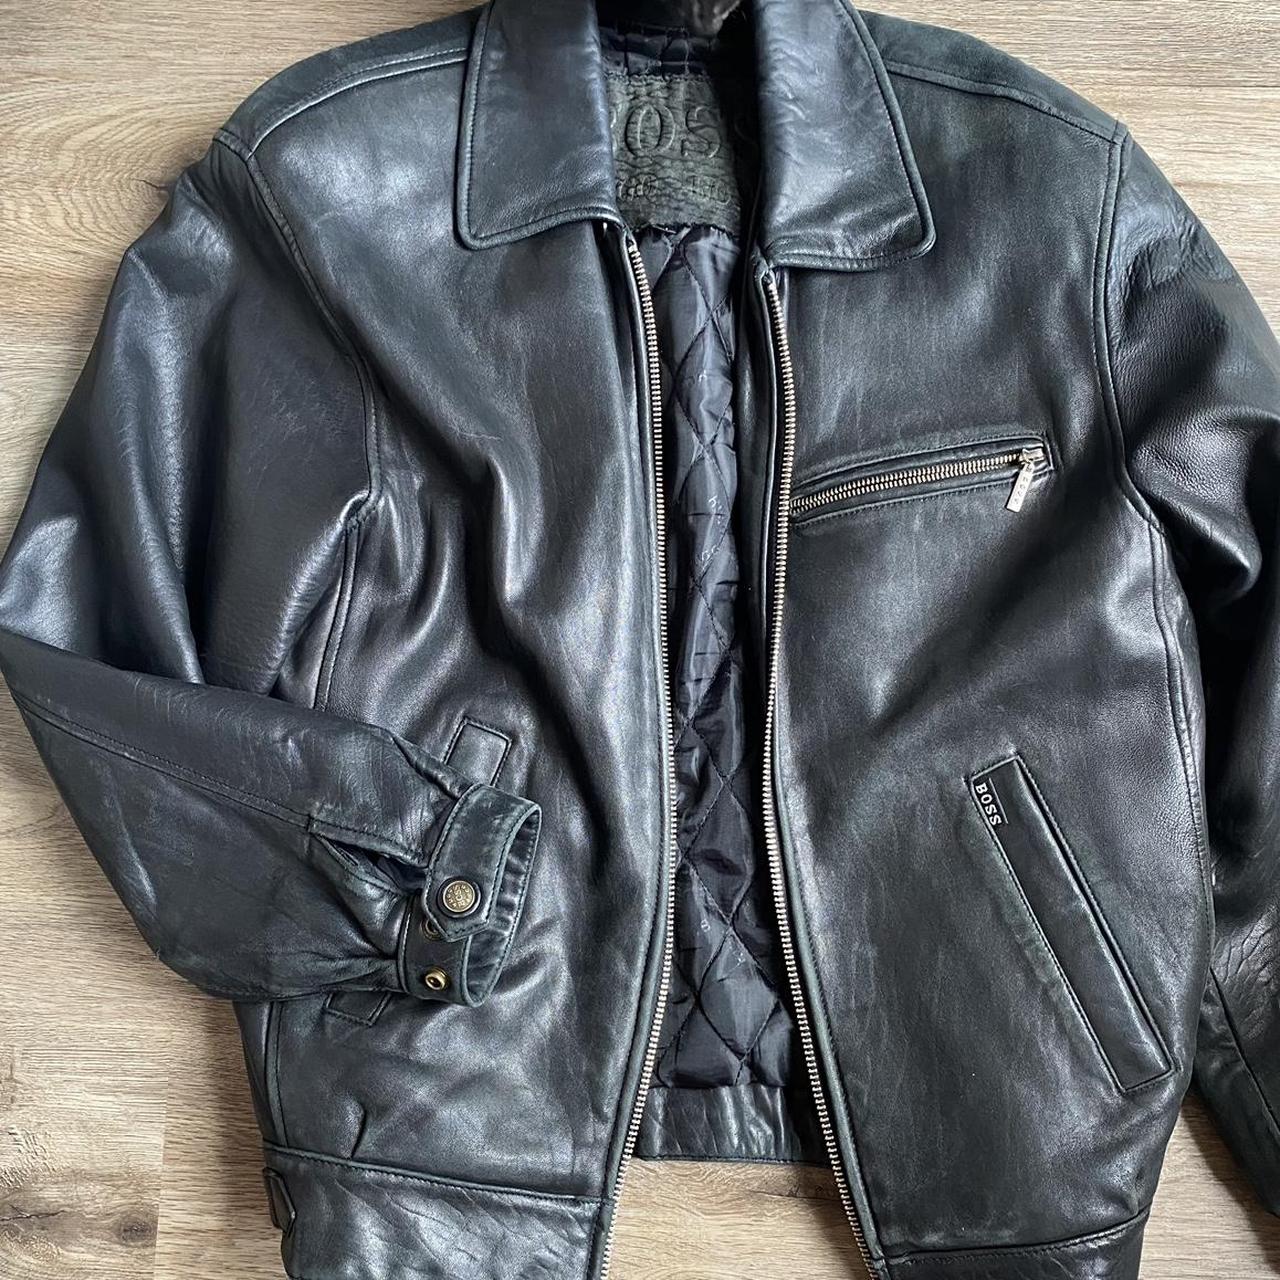 Hugo Boss Leather Jacket 🖤 Size M Arms have the... - Depop